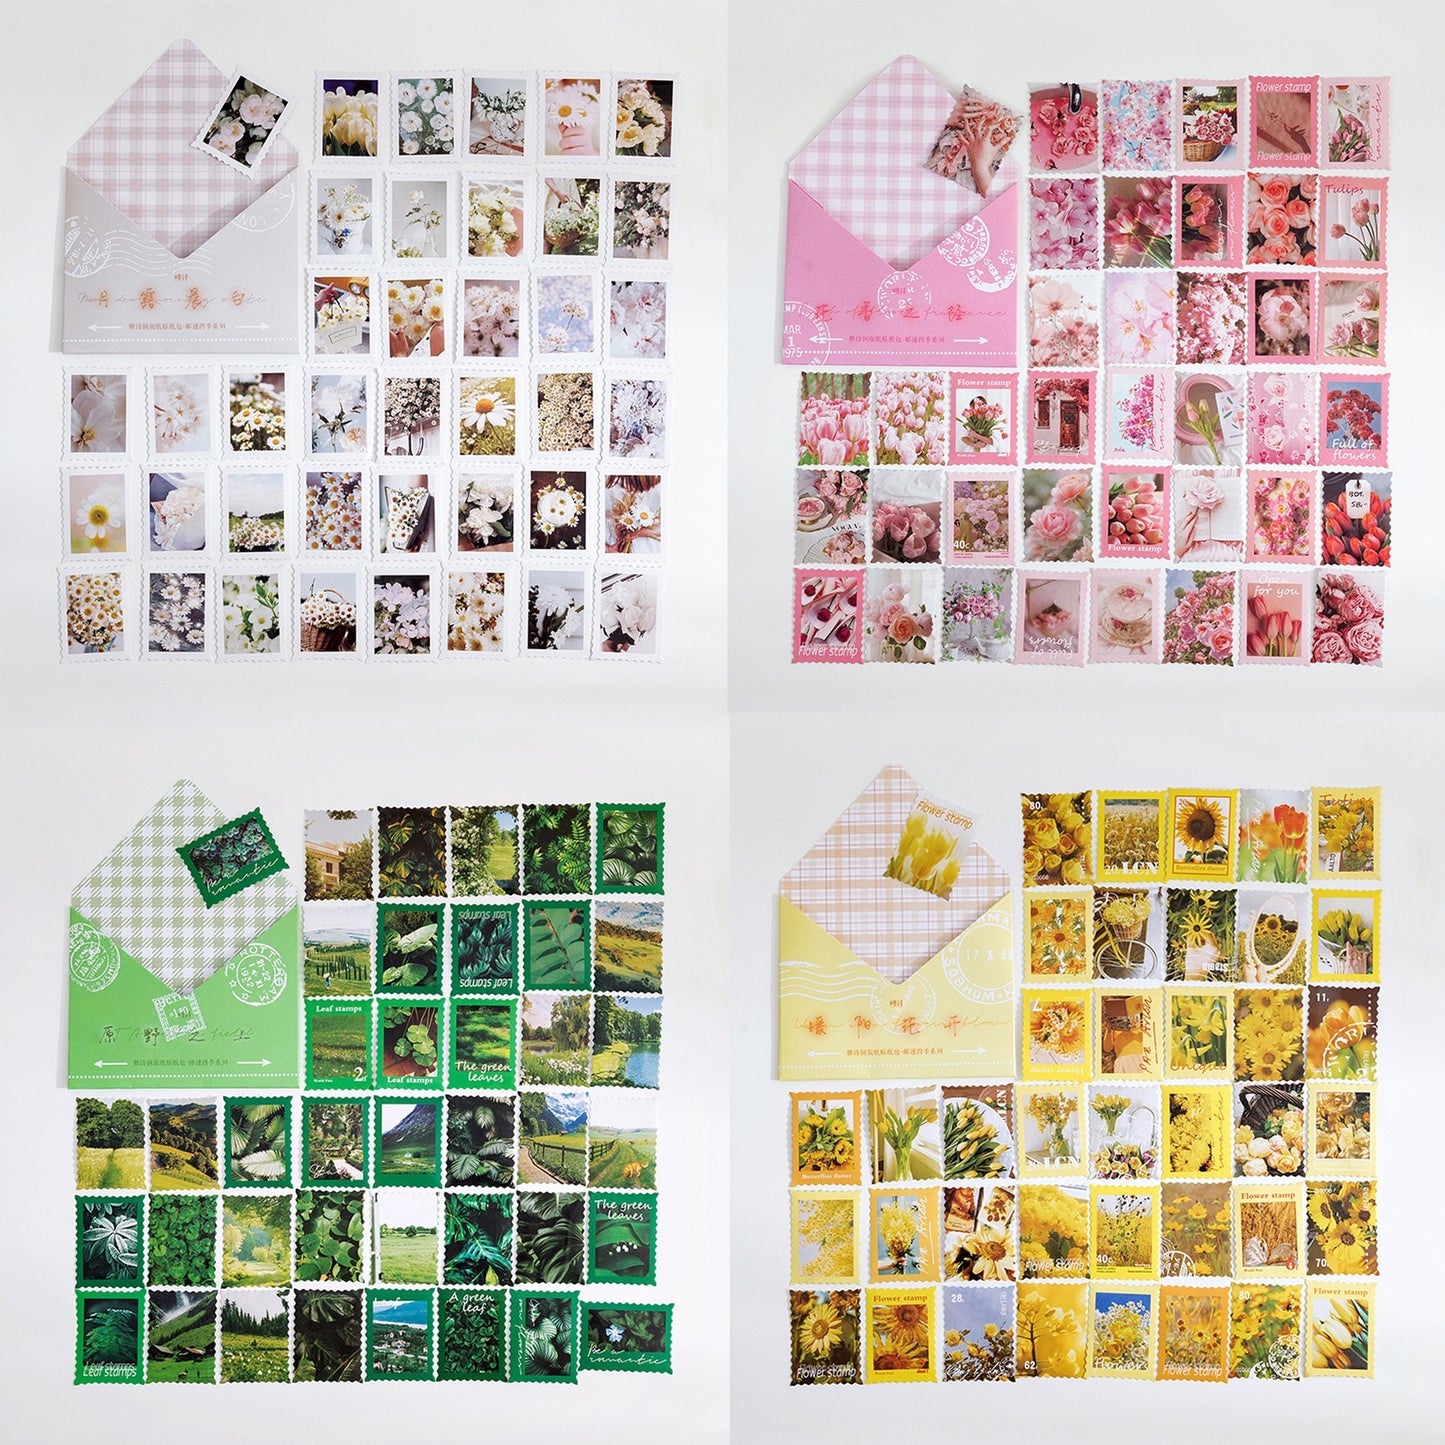 Kawaii Stamp Stickers, Bright Color Stickers, Kawaii Stickers, Cute Stamp Stickers, Photo Stamp Stickers B4P